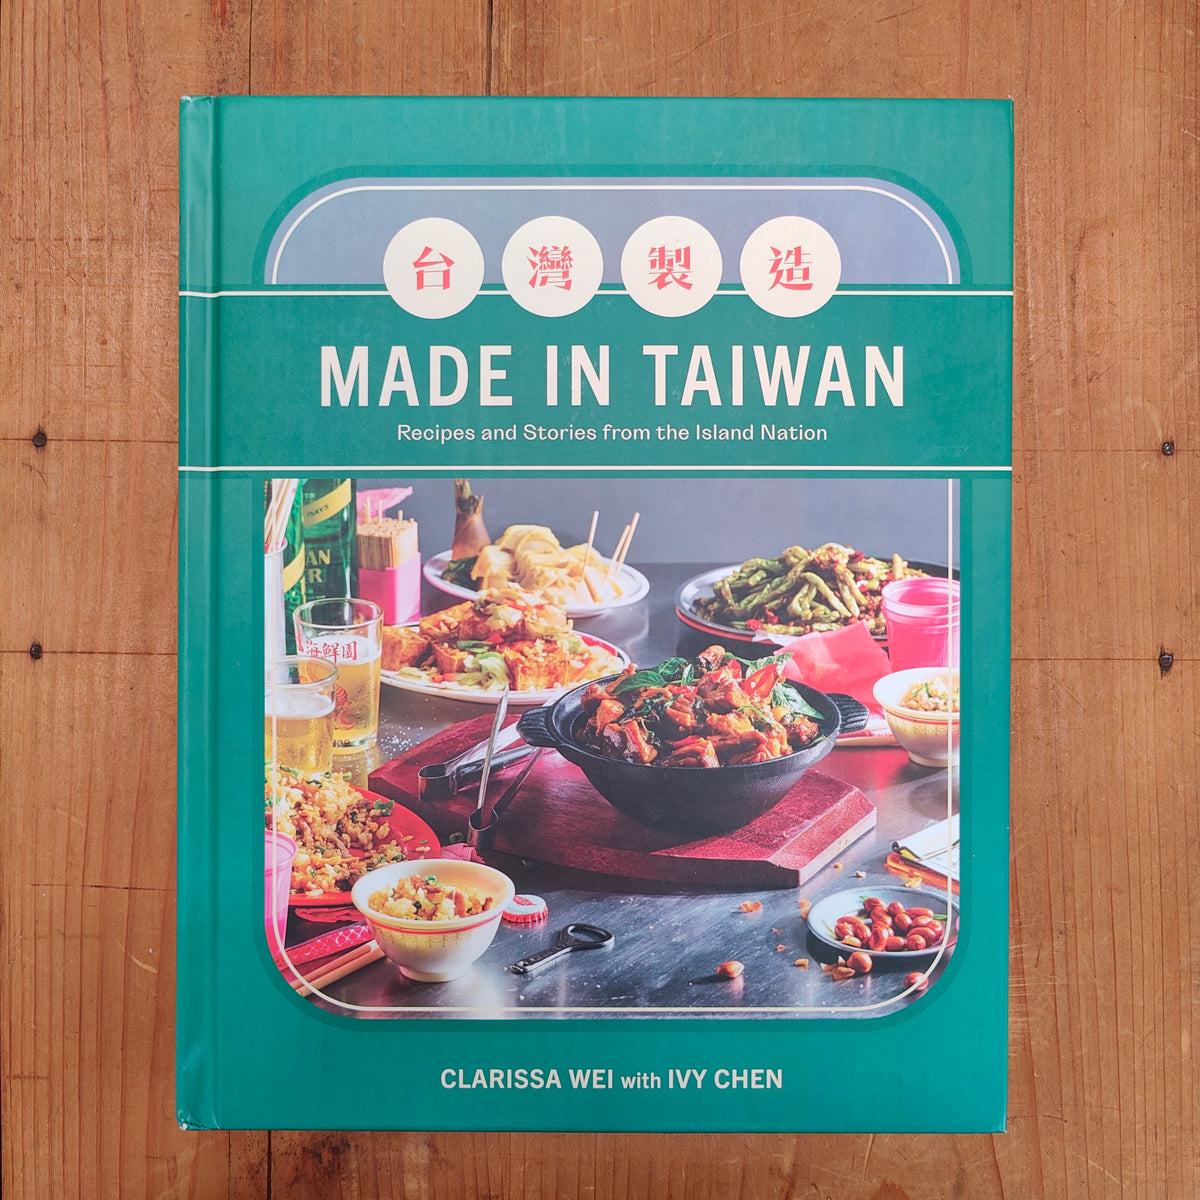 Made in Taiwan - Clarissa Wei with Ivy Chen